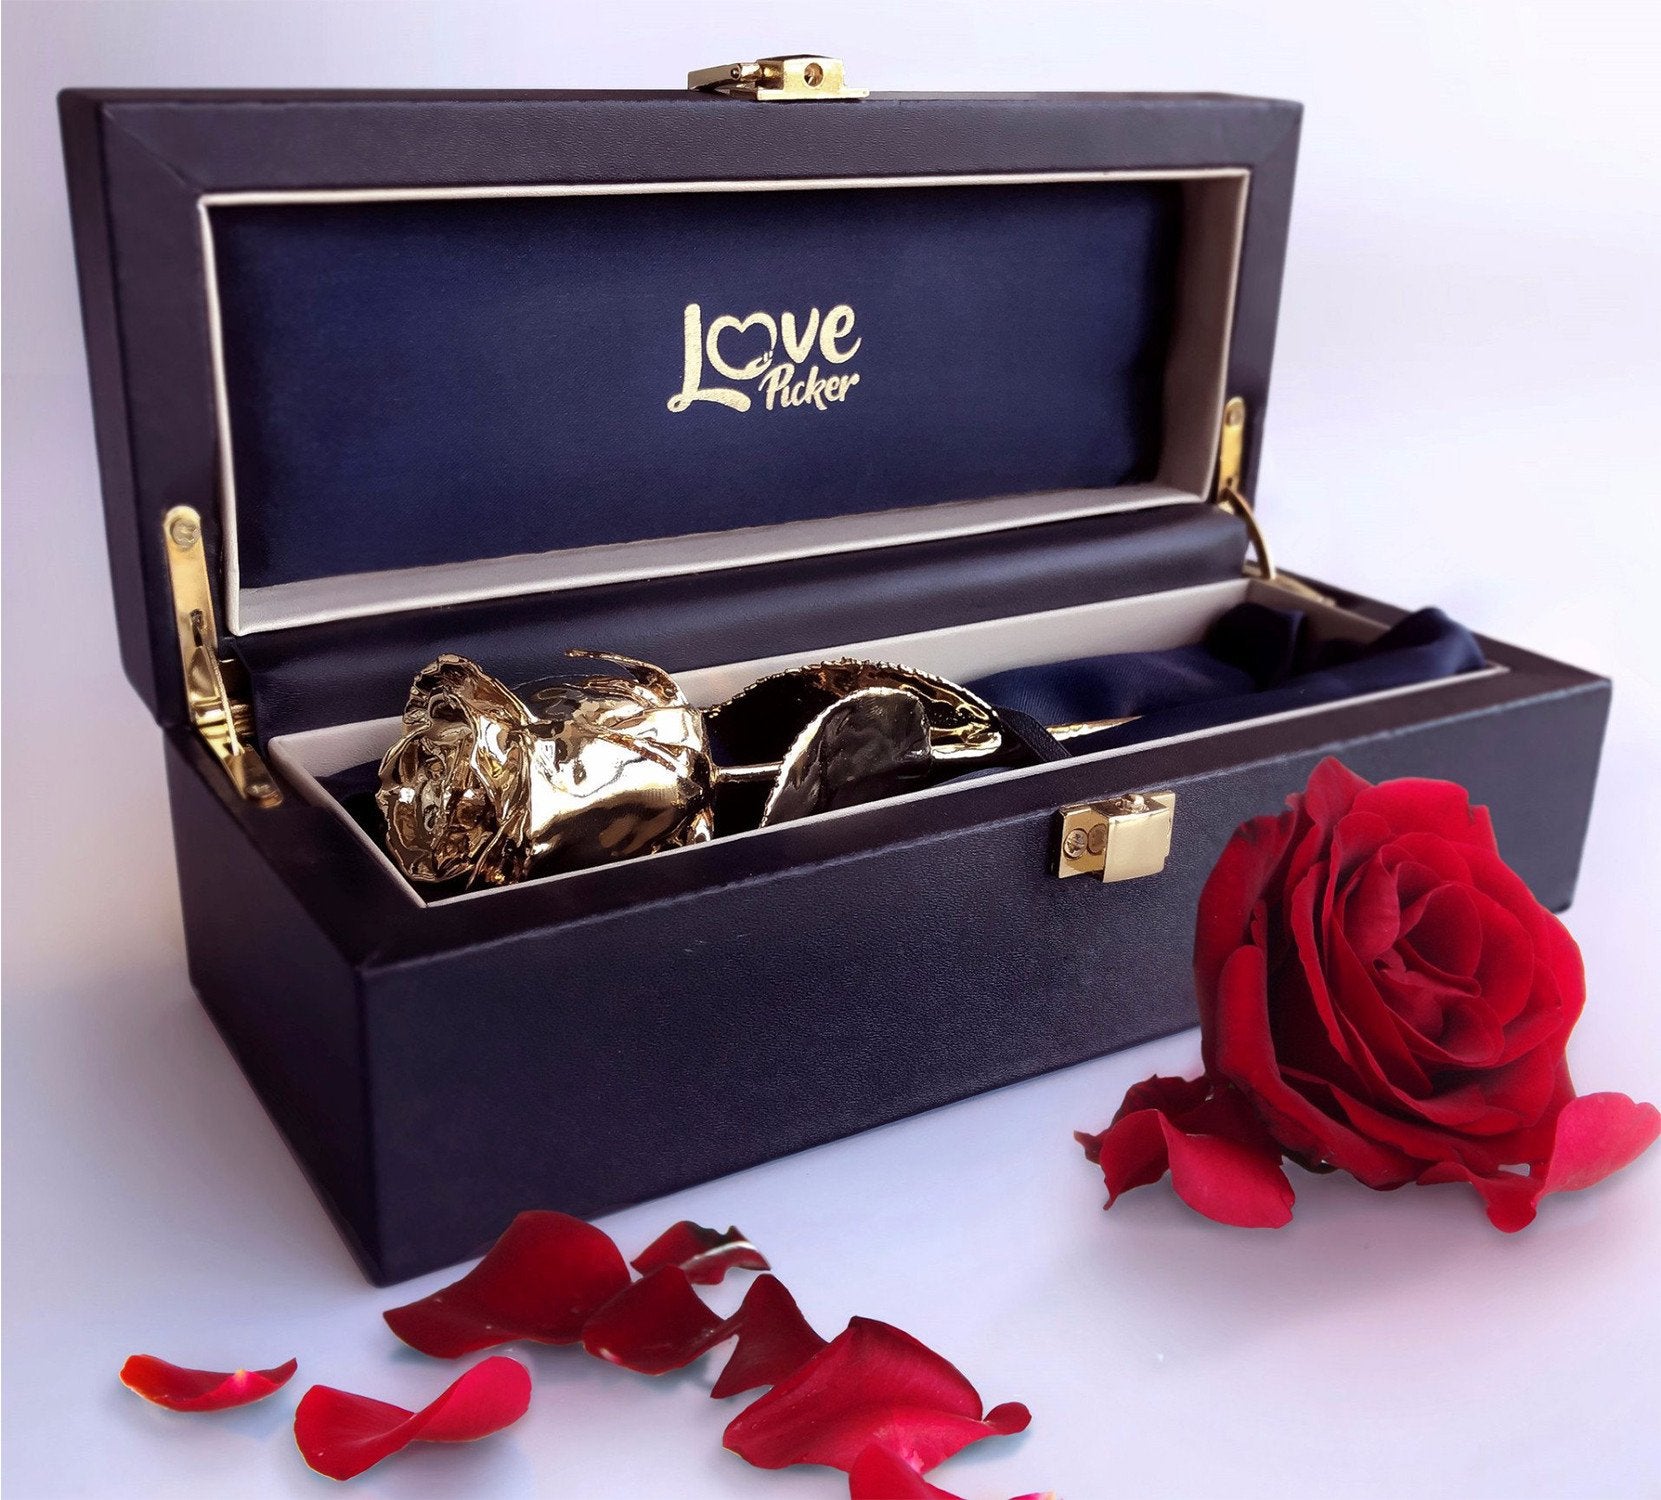 24 Karat Gold Dipped Natural Rose 7" - Midnight Blue Box with Real Rose Petals - Lovepicker